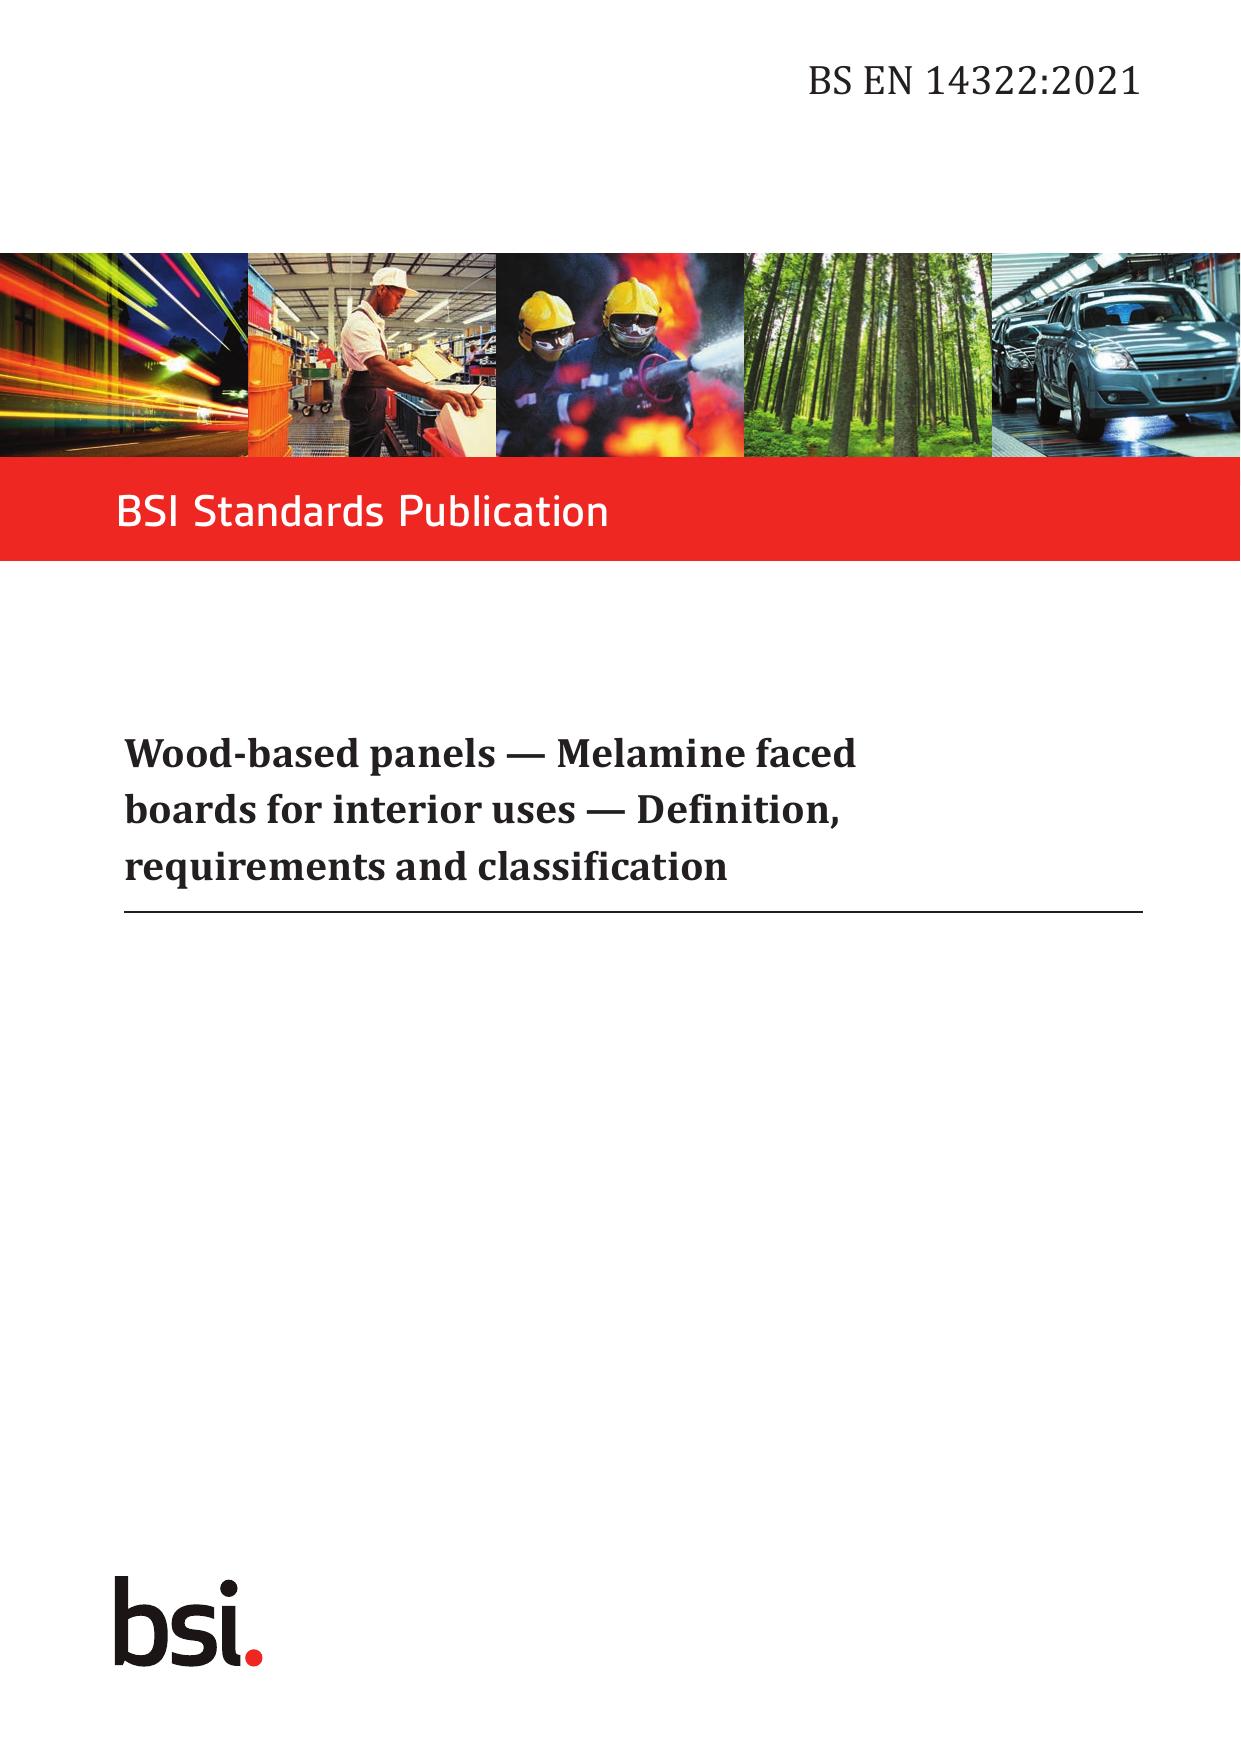 BS EN 14322:2021 by The British Standards Institution